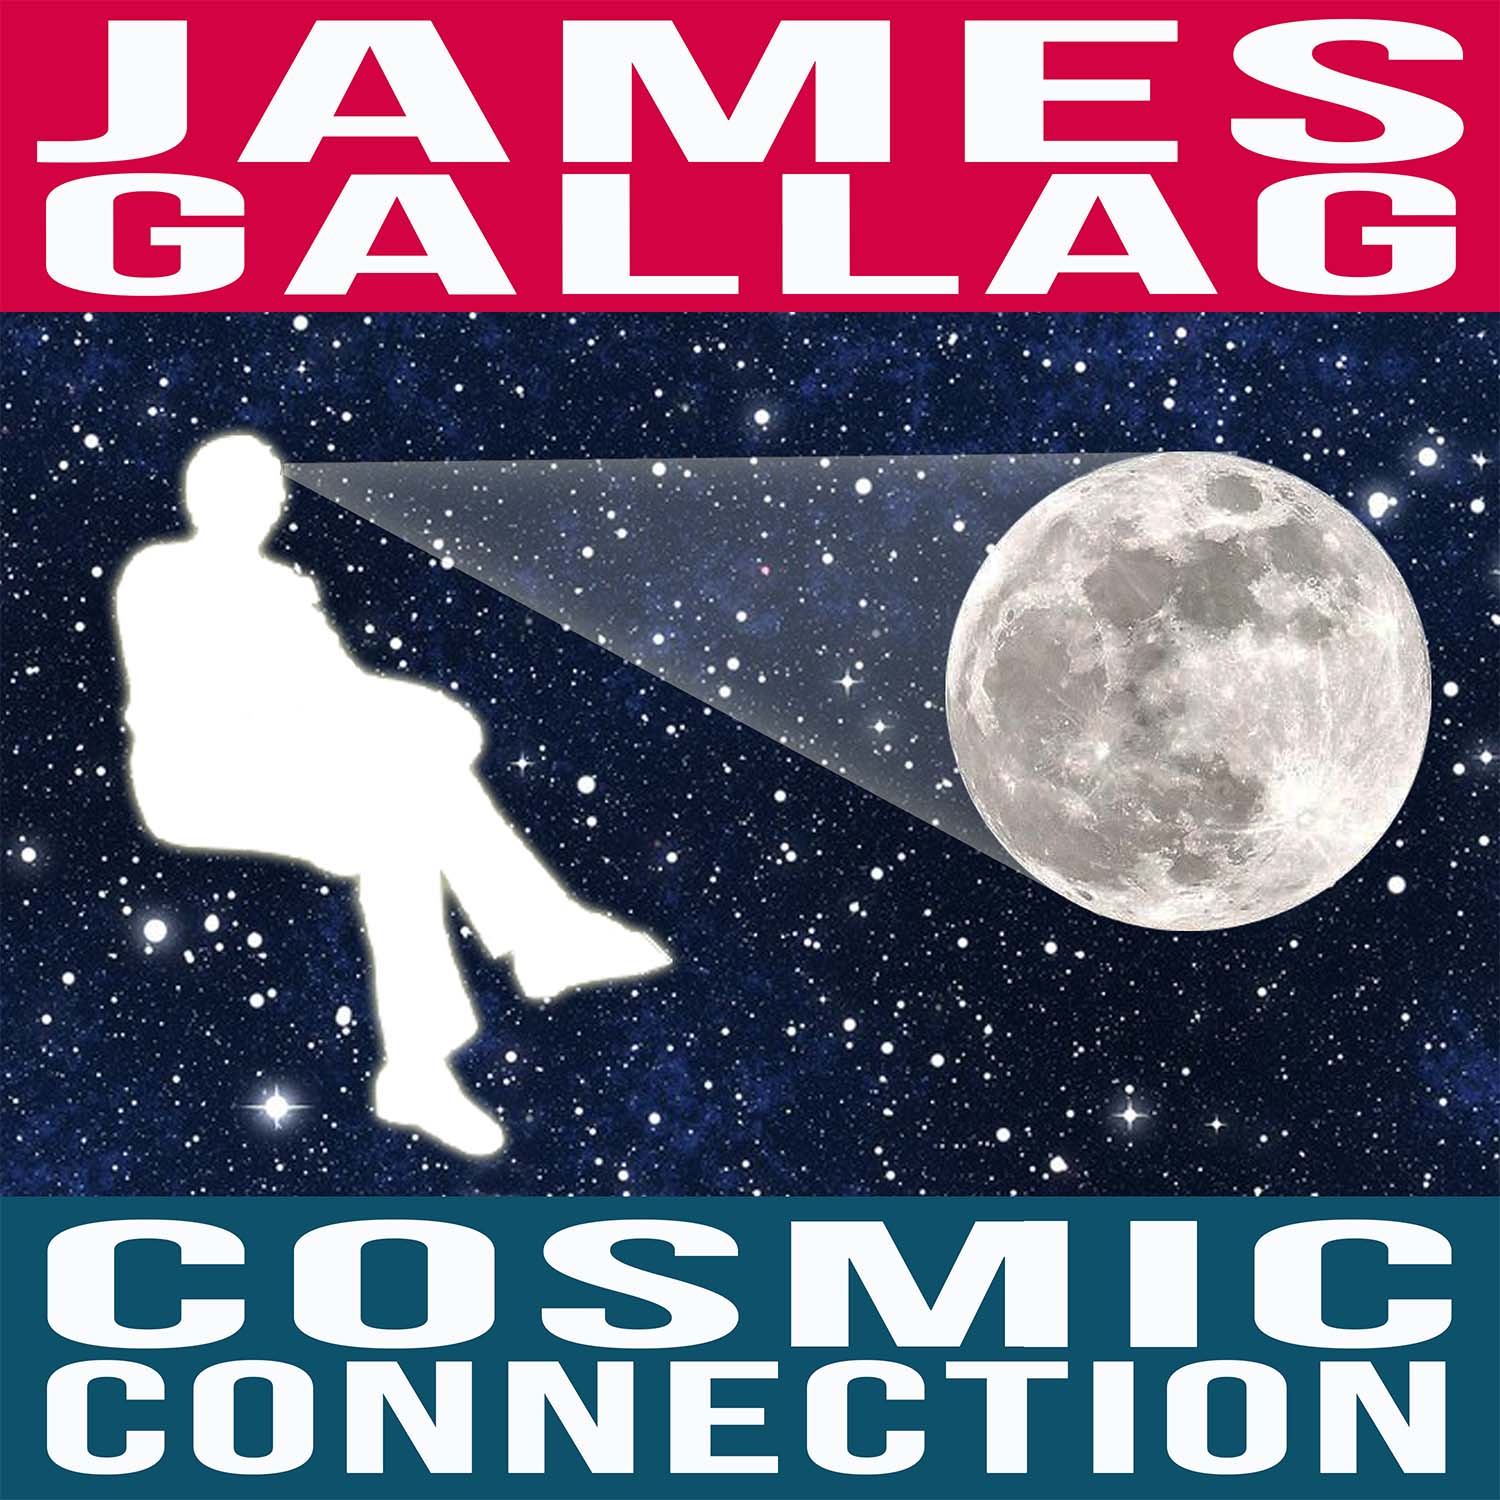 James Gallag - Cosmic Connection